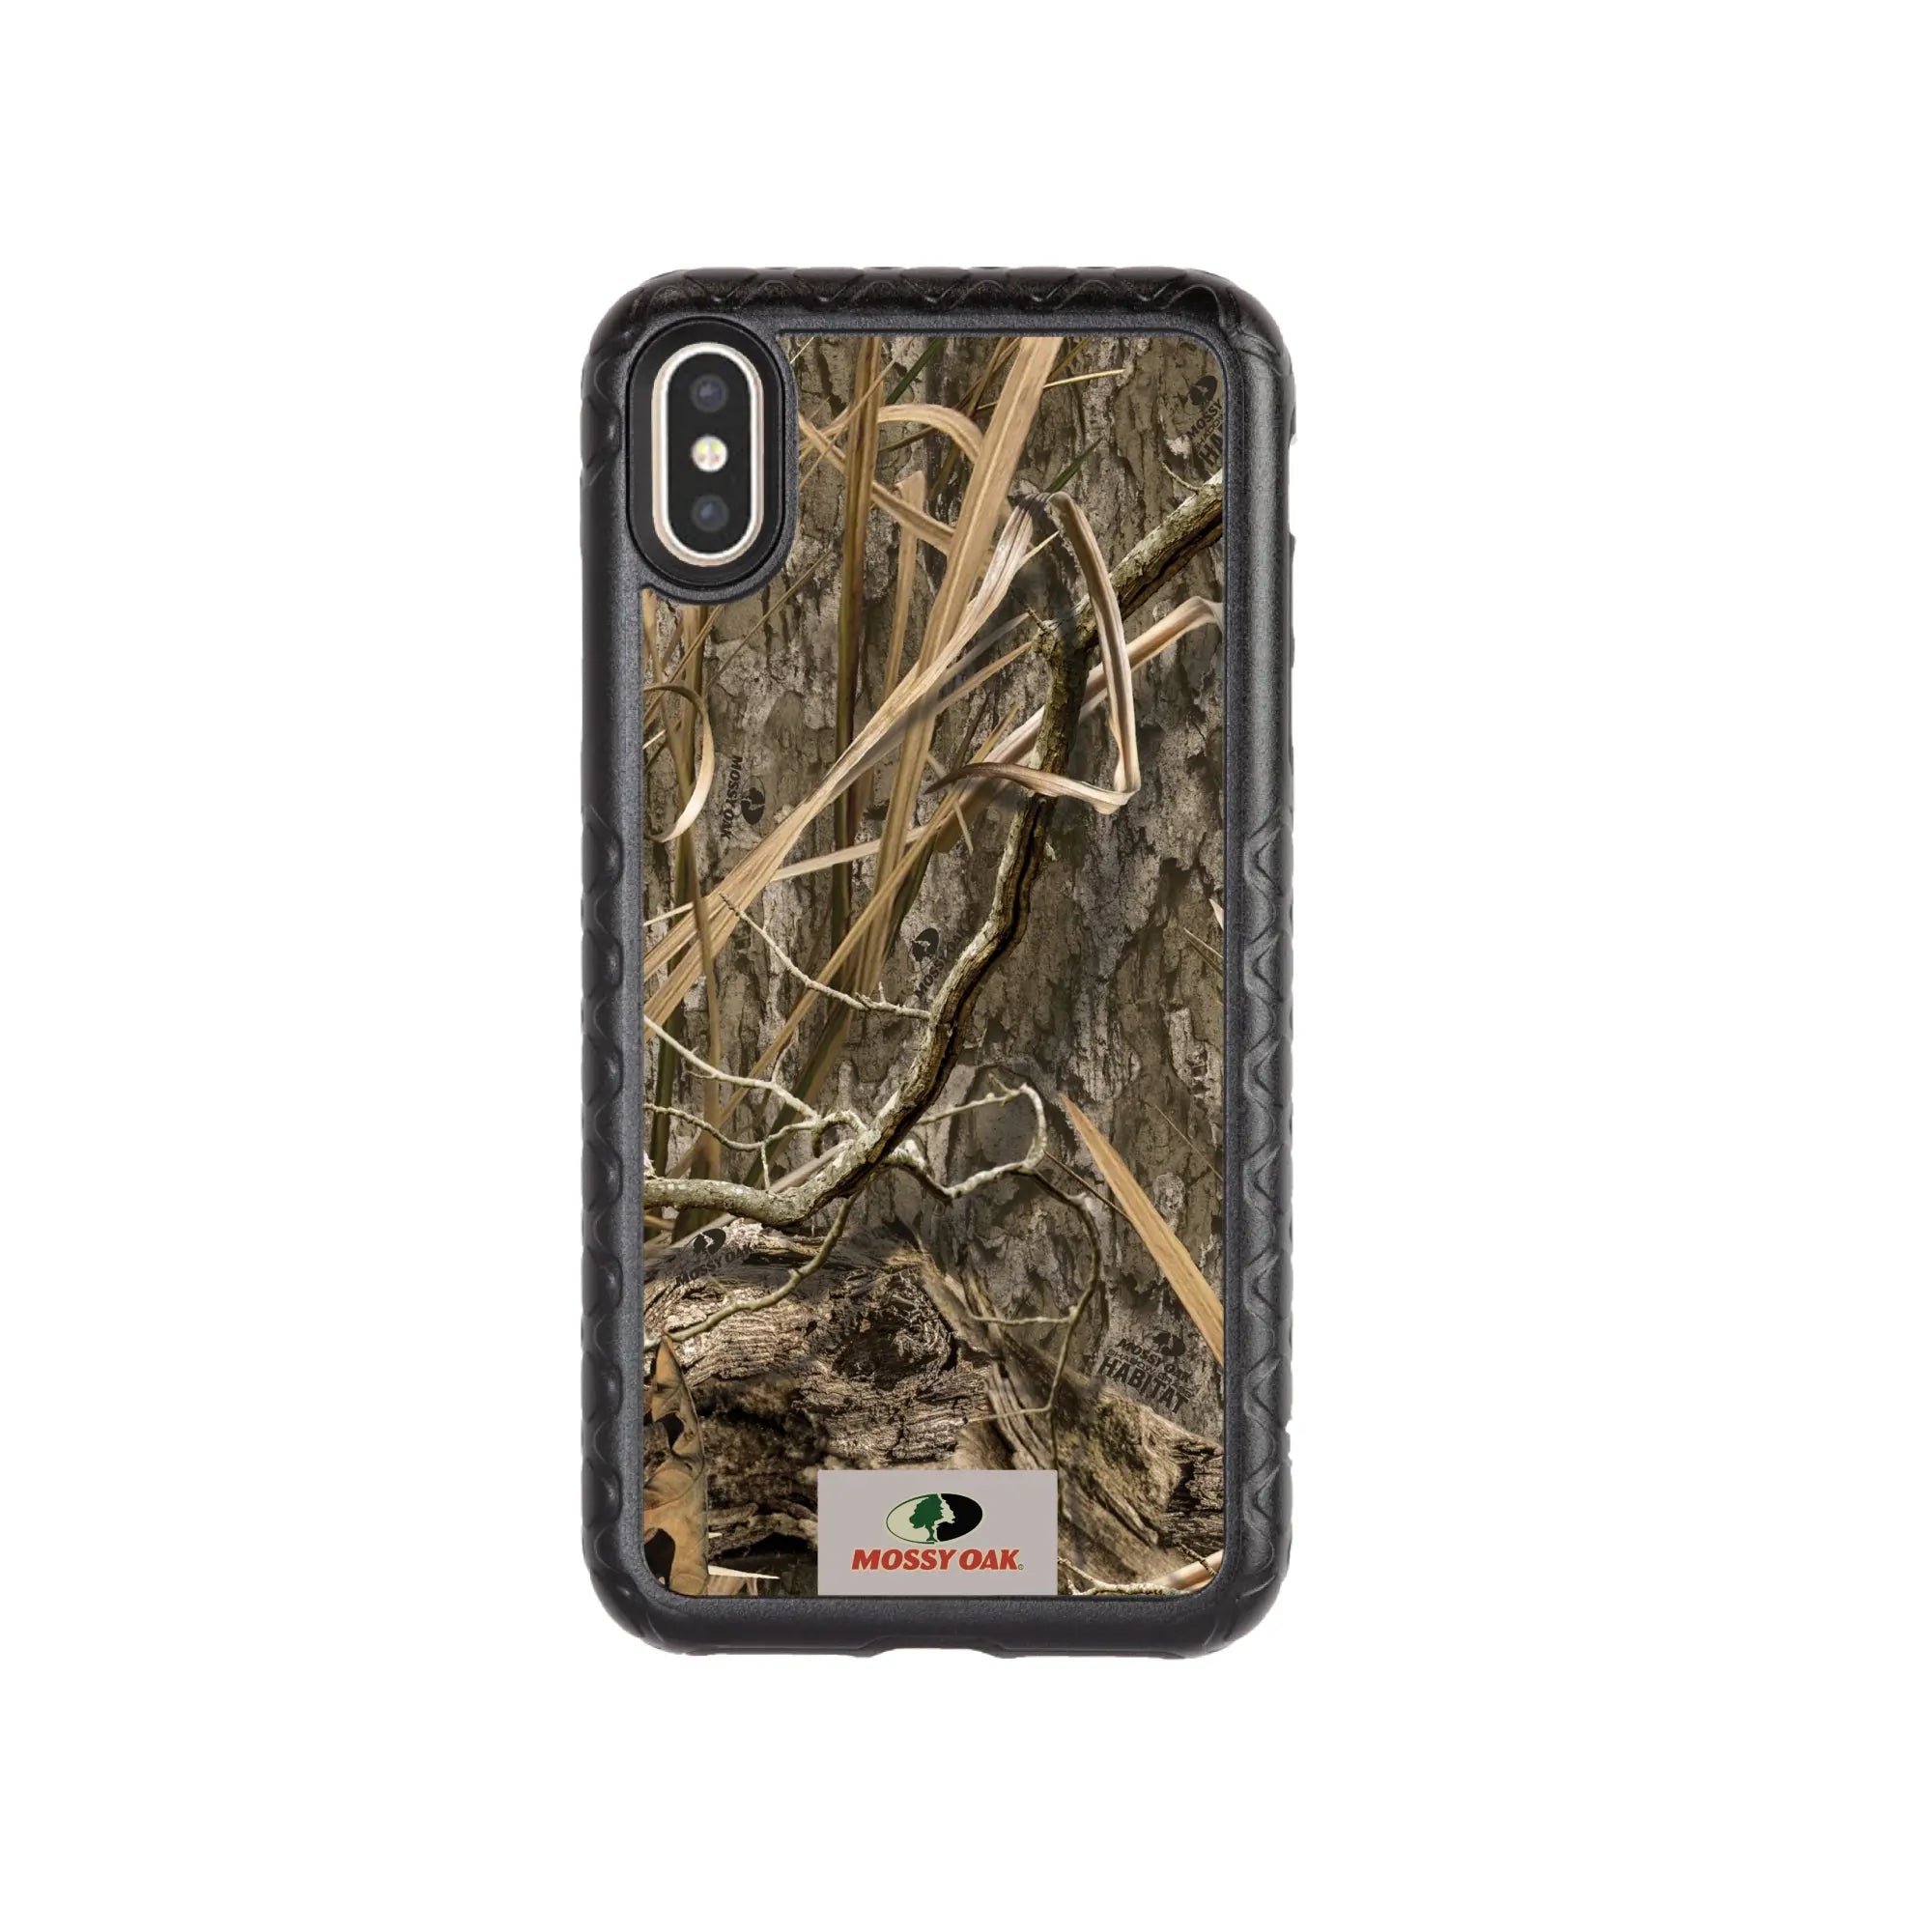 Mossy Oak Fortitude Series for Apple iPhone XS Max - Shadow Grass - Custom Case - OnyxBlack - cellhelmet